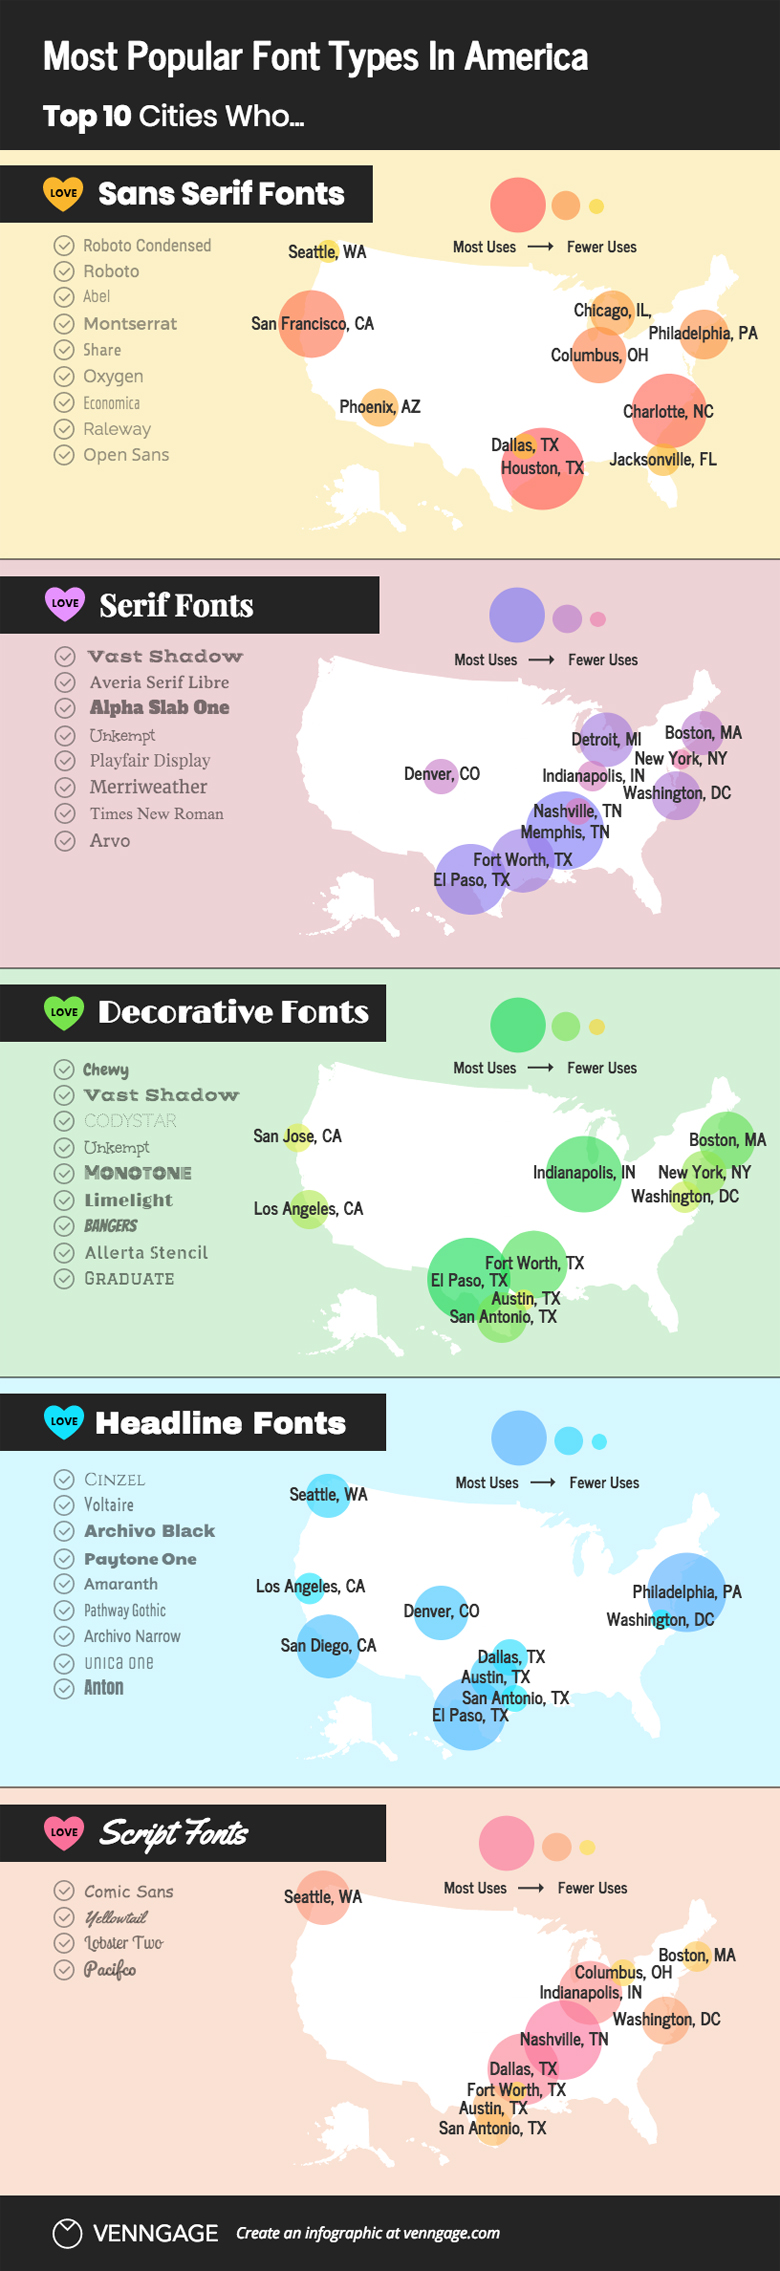 The Most Popular Font Types In America